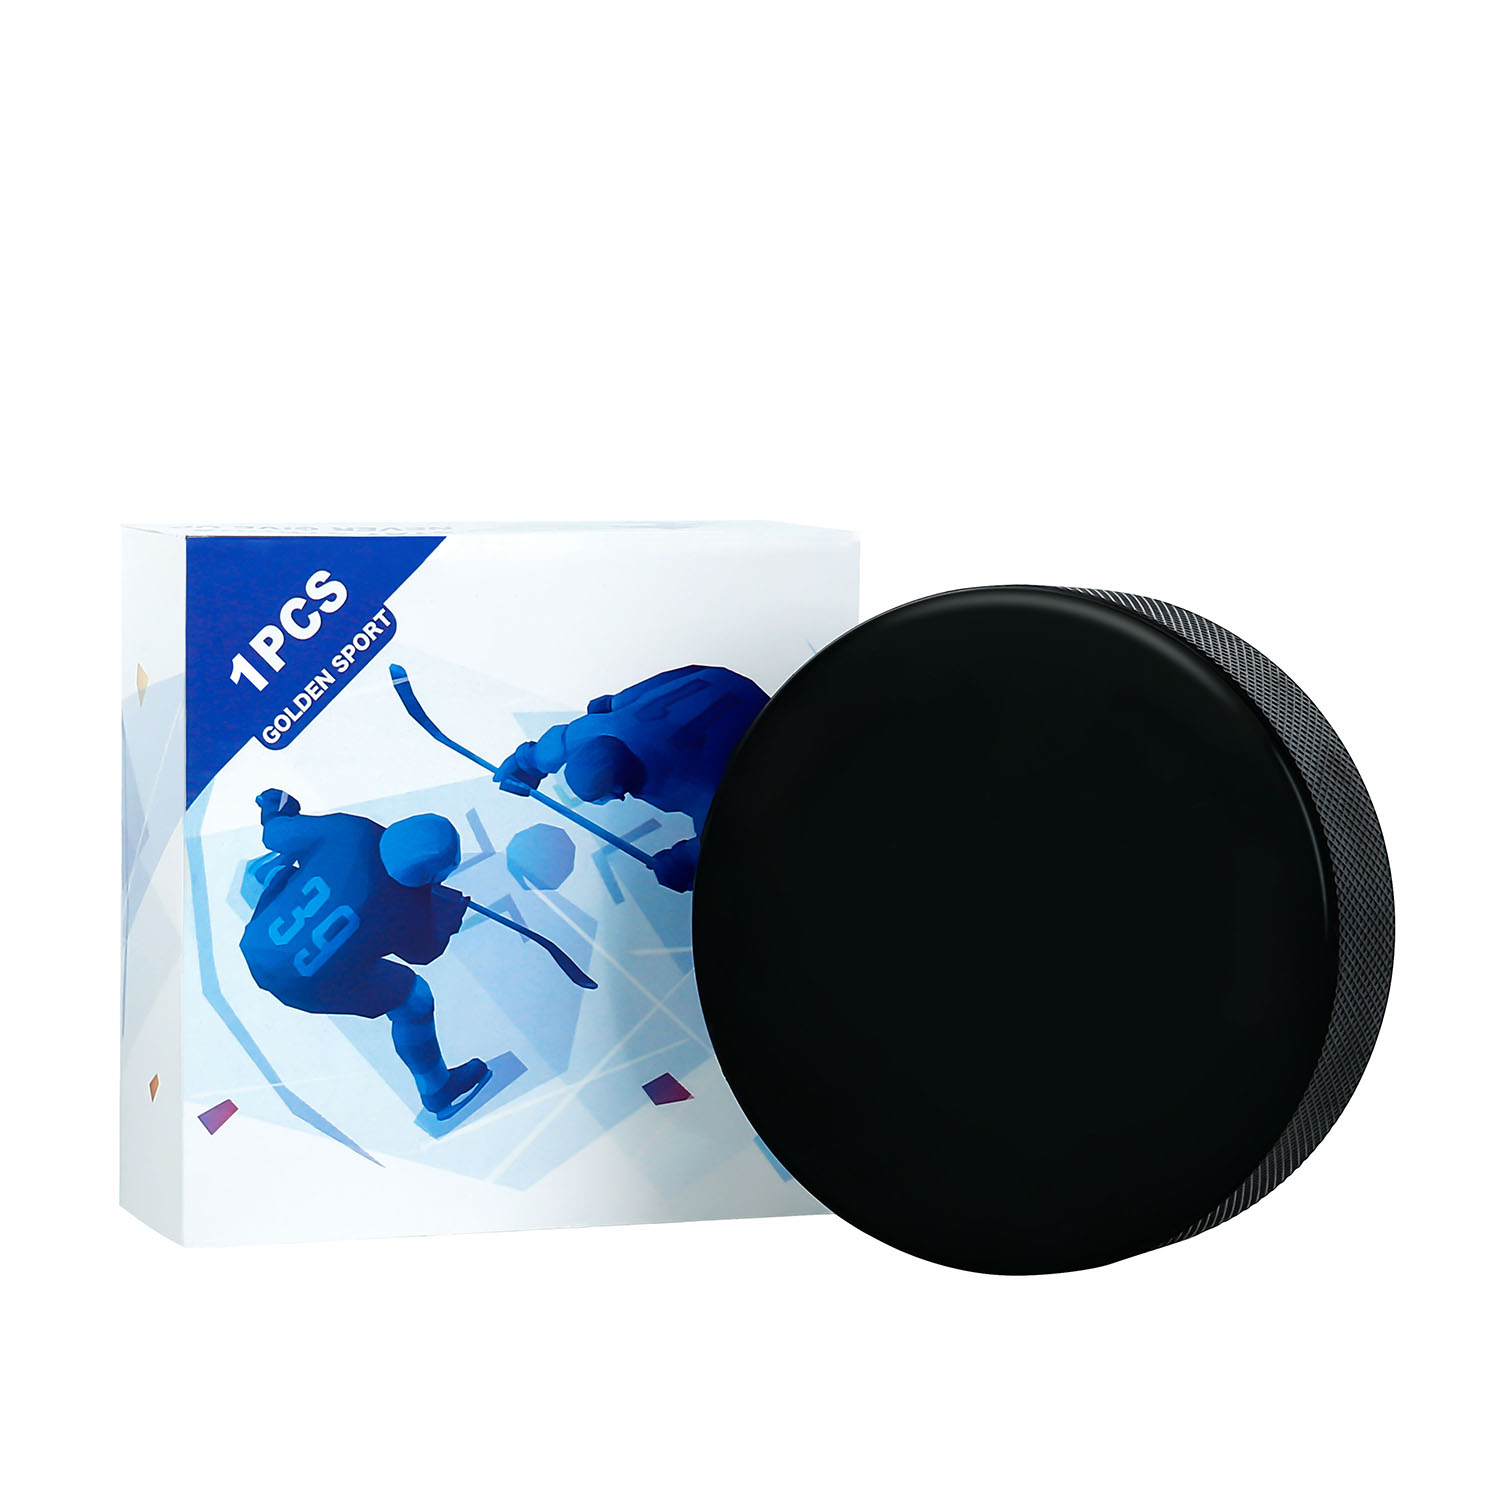 Professional Sports Classic Black Ice Hockey Competition Training Rubber Puck 